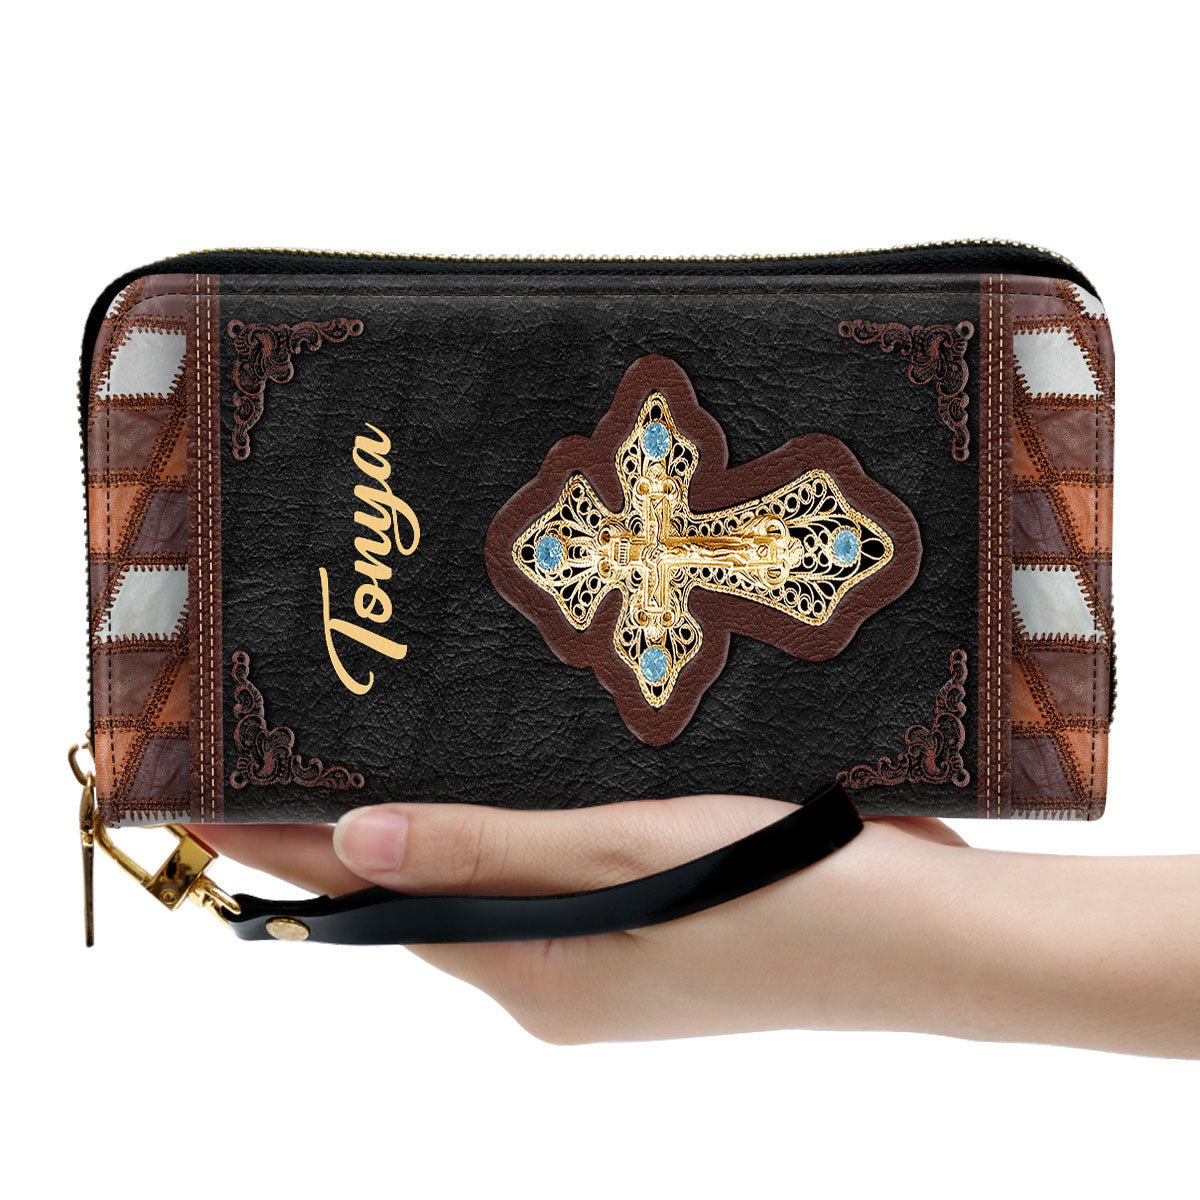 Cross Christ Gift For Women Of God With God All Things Are Possible Clutch Purse For Women - Personalized Name - Christian Gifts For Women